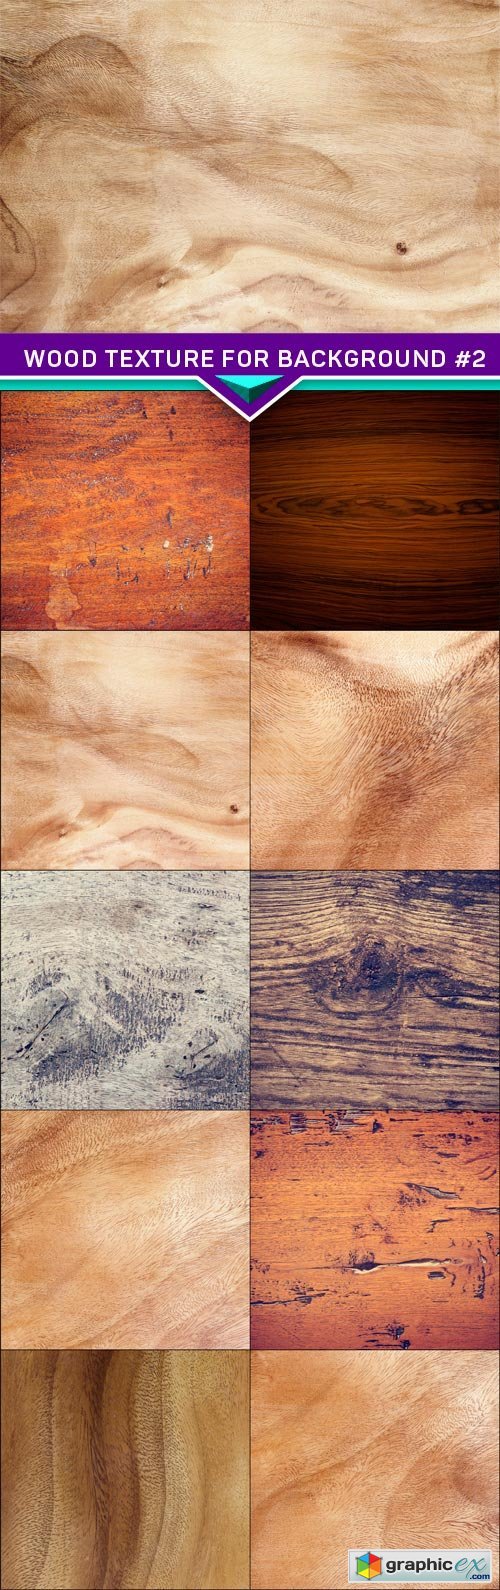 Wood texture for background #2 10X JPEG